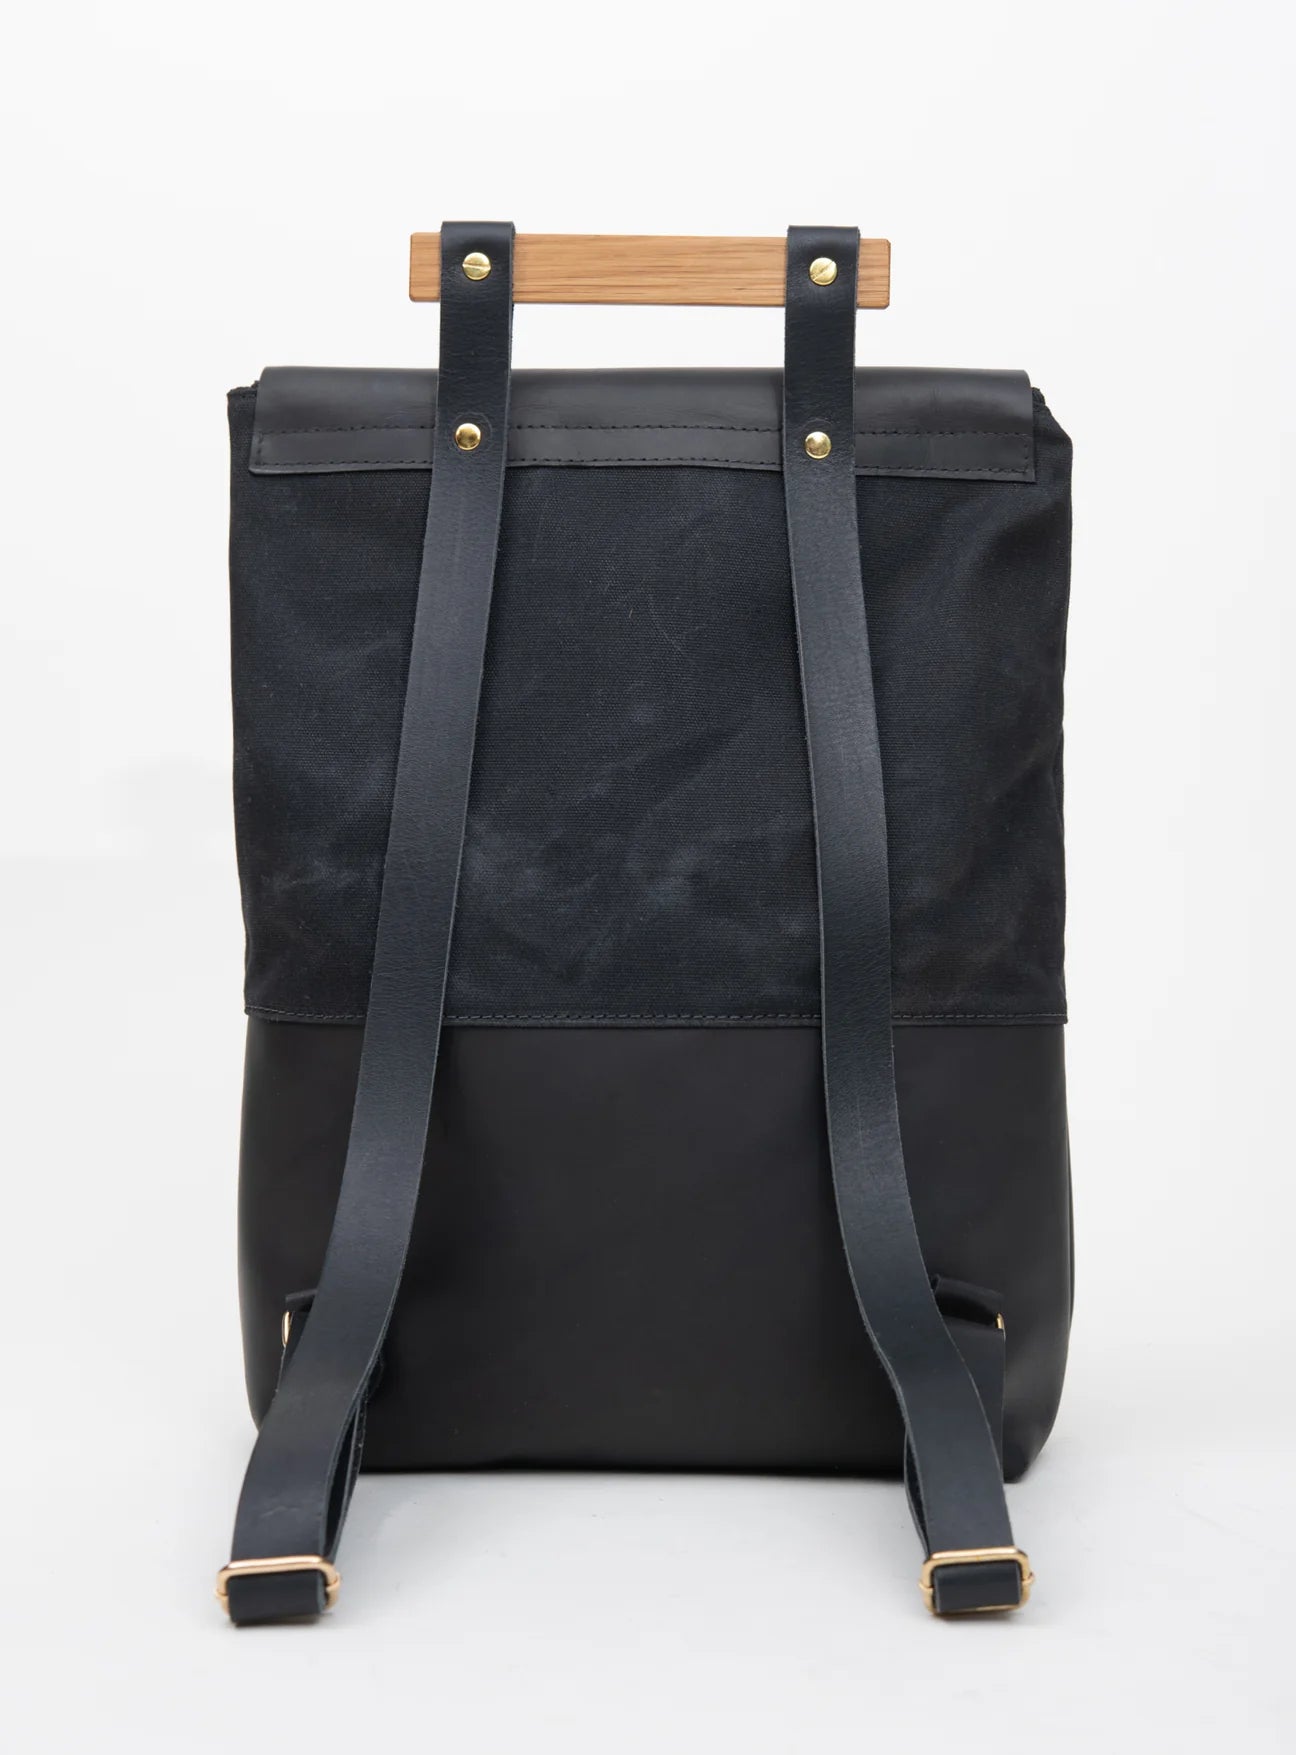 Leather and Waxed Cotton Backpack, Fullum Model